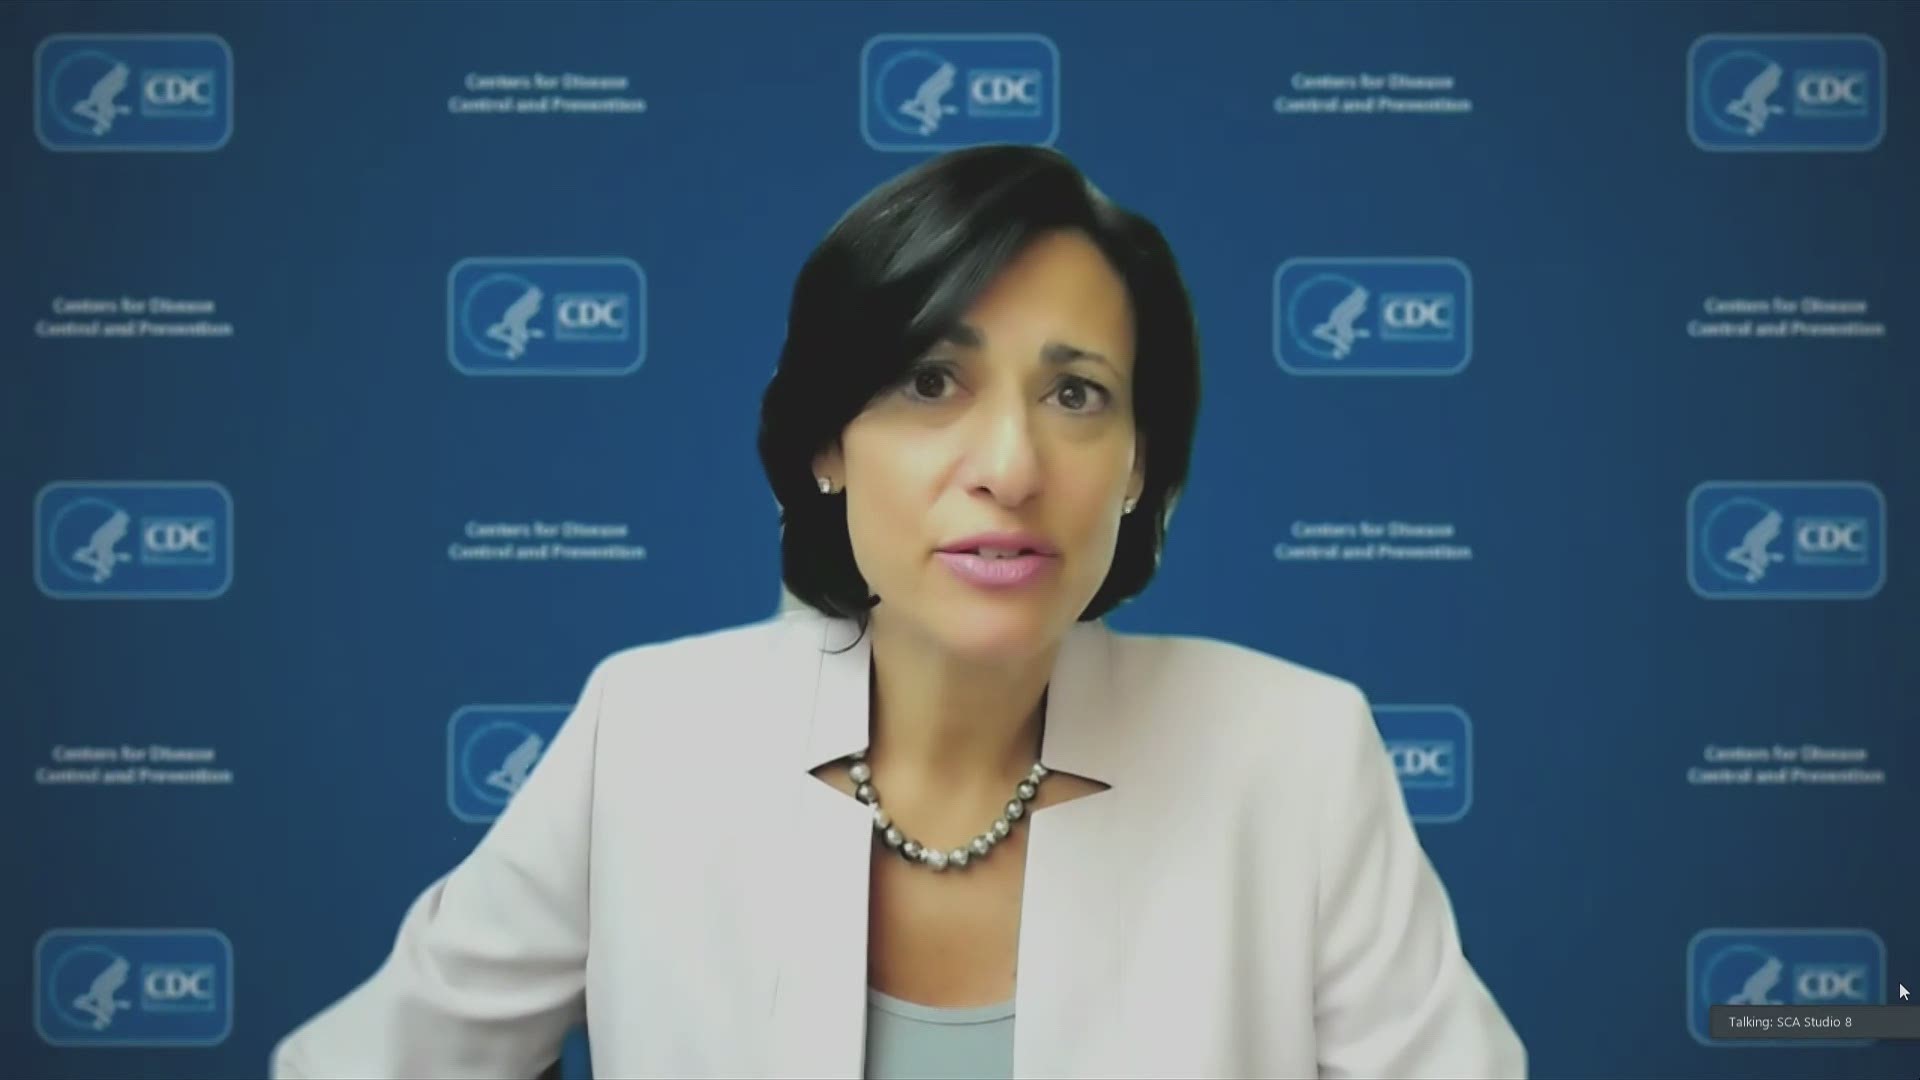 CDC Director addresses COVID pandemic impact across the United States on July 22, 2021.